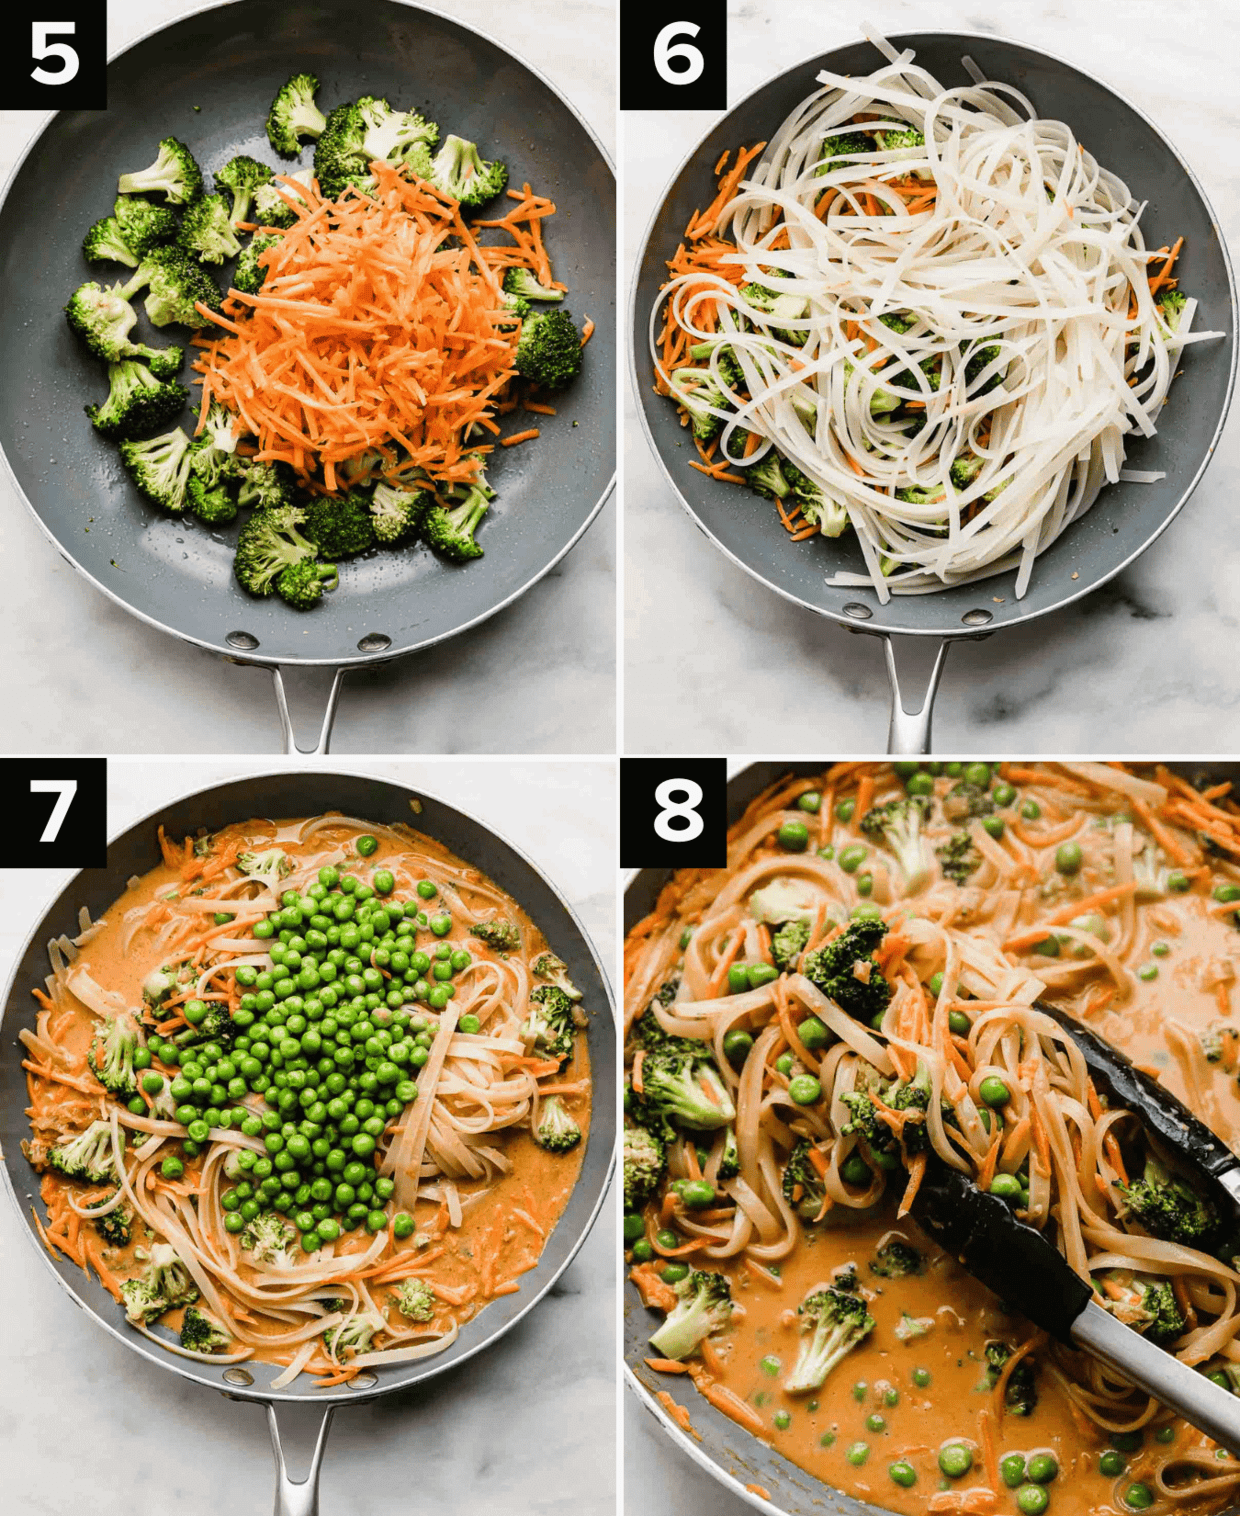 Four images top left is skillet with broccoli and matchstick carrots, top right is rice noodles in skillet, bottom left is Coconut Curry Noodles in skillet, and bottom right is tongs holding Coconut Curry Noodles.